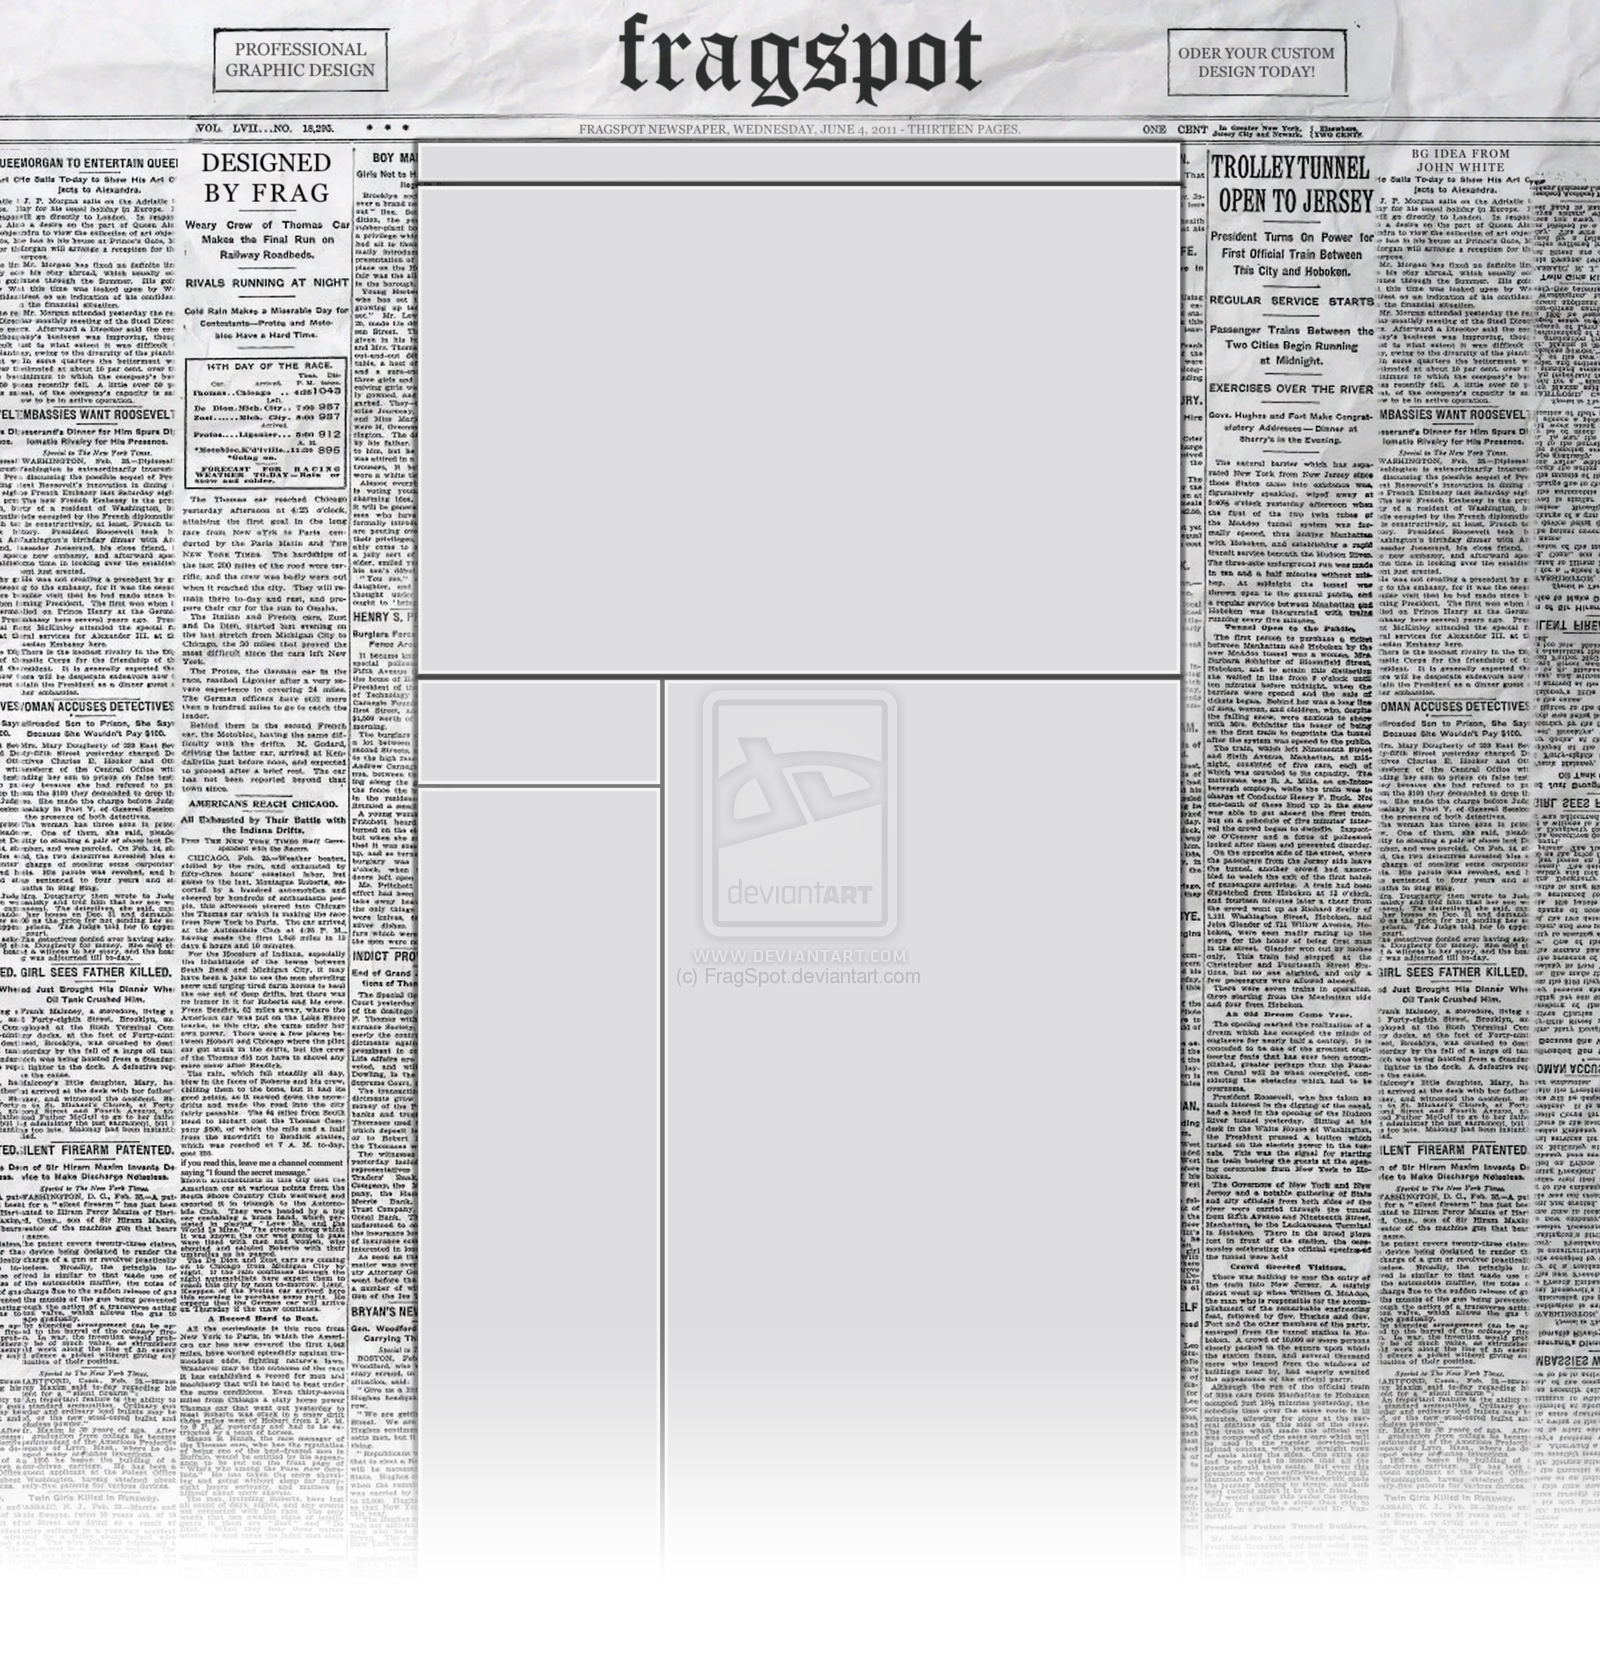 Newspaper Background By Fragspot